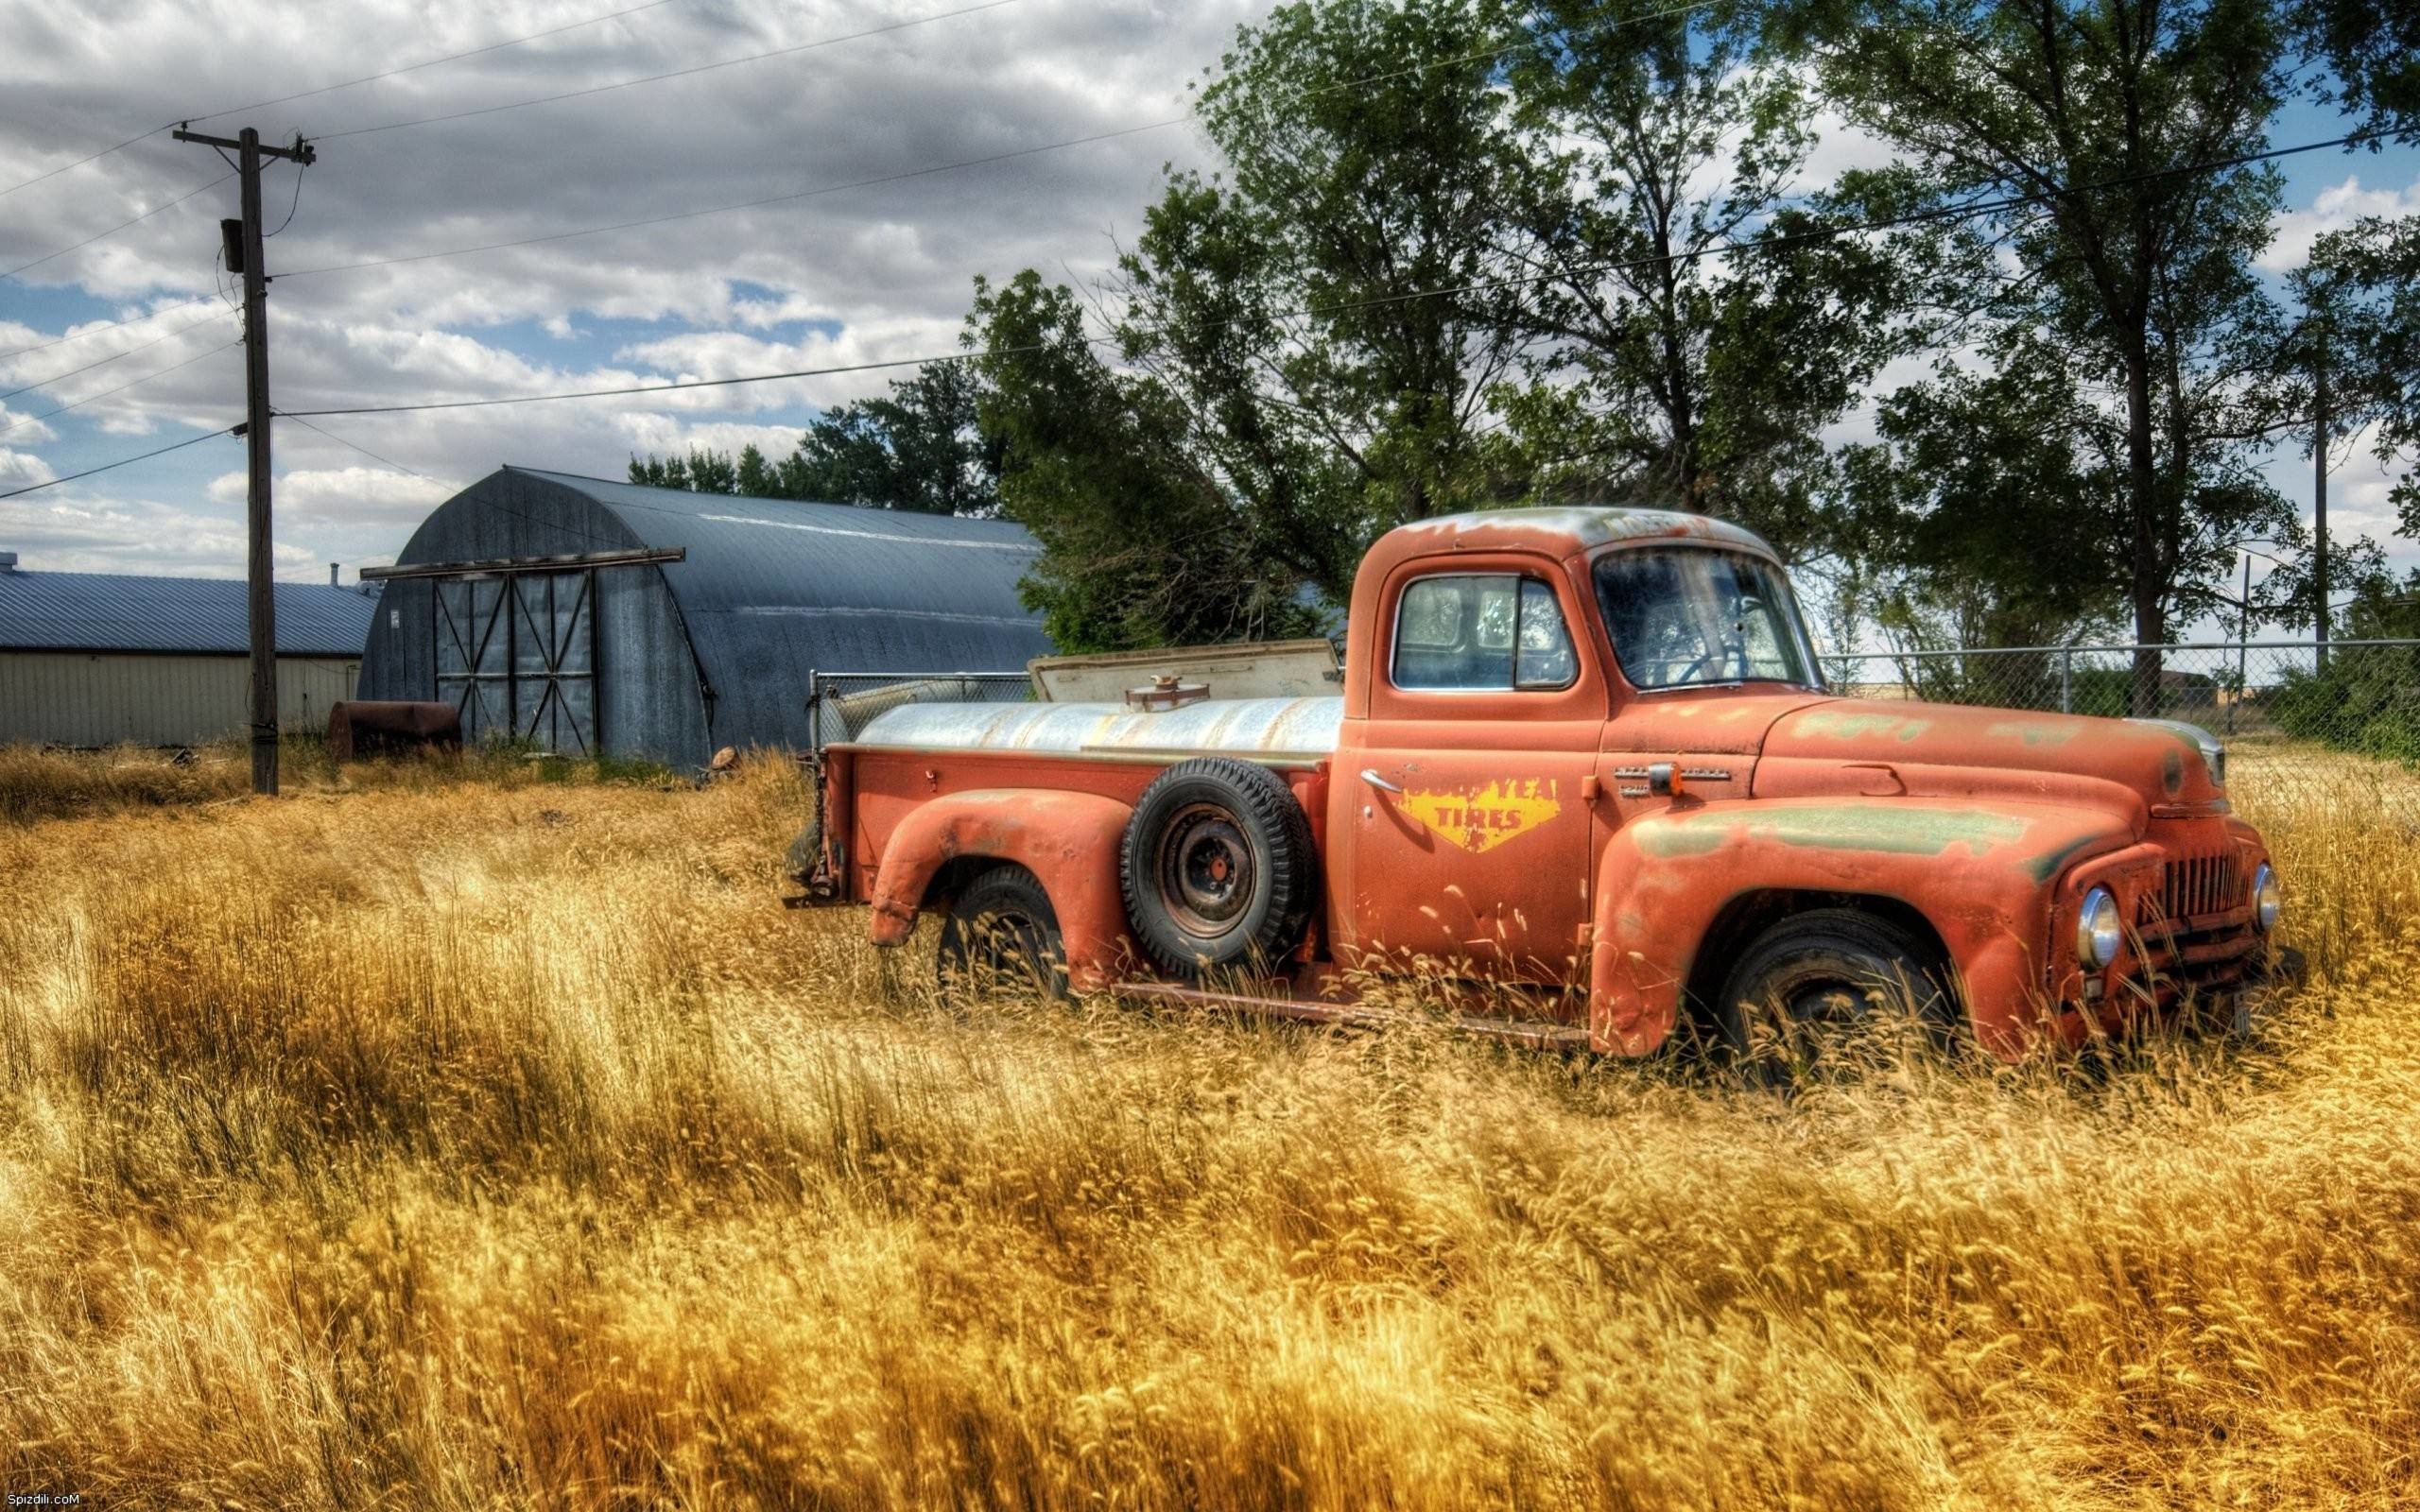 Old Rusted Truck Wallpapers Auto Desktop 2560x1600PX ~ Wallpaper .